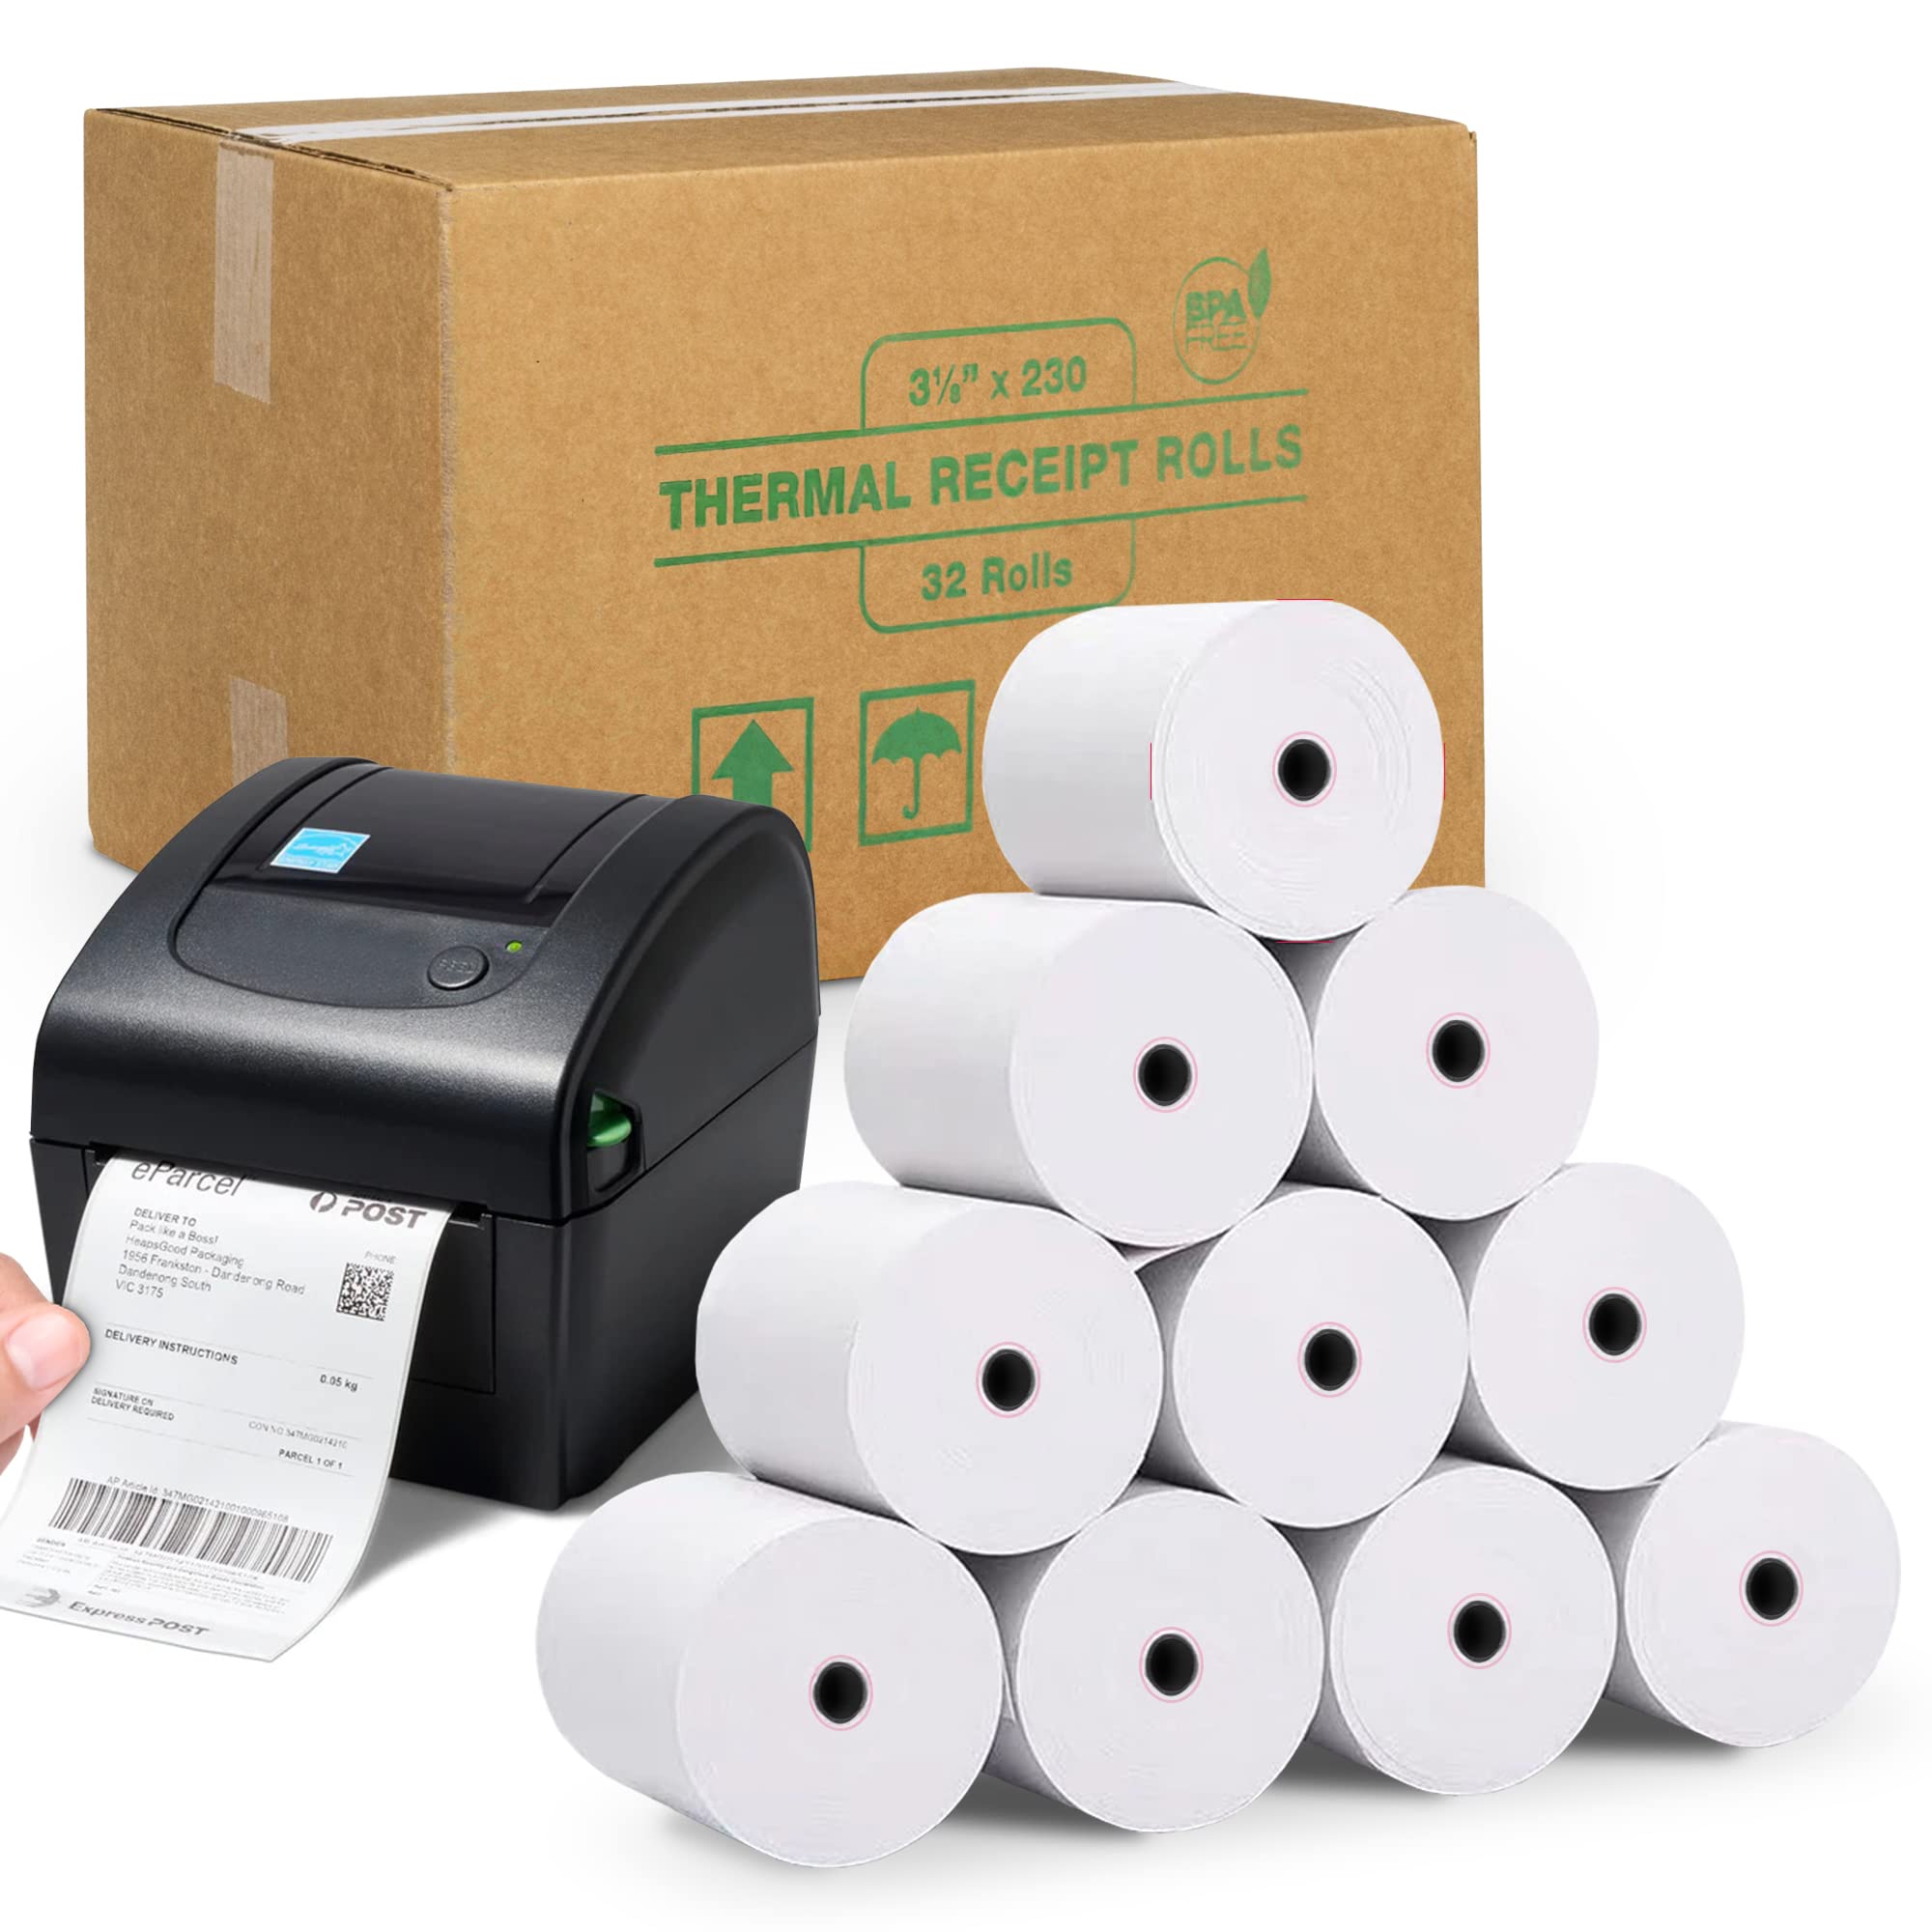 Book Cover FHS 3 1/8” X 230’ Thermal Paper for Receipts - 32 Rolls of Receipt Paper Compatible with Wide Range of POS Systems for Small Business – Use as Receipt Paper, Cash Registers Printer, ATM Machine 32 Pack